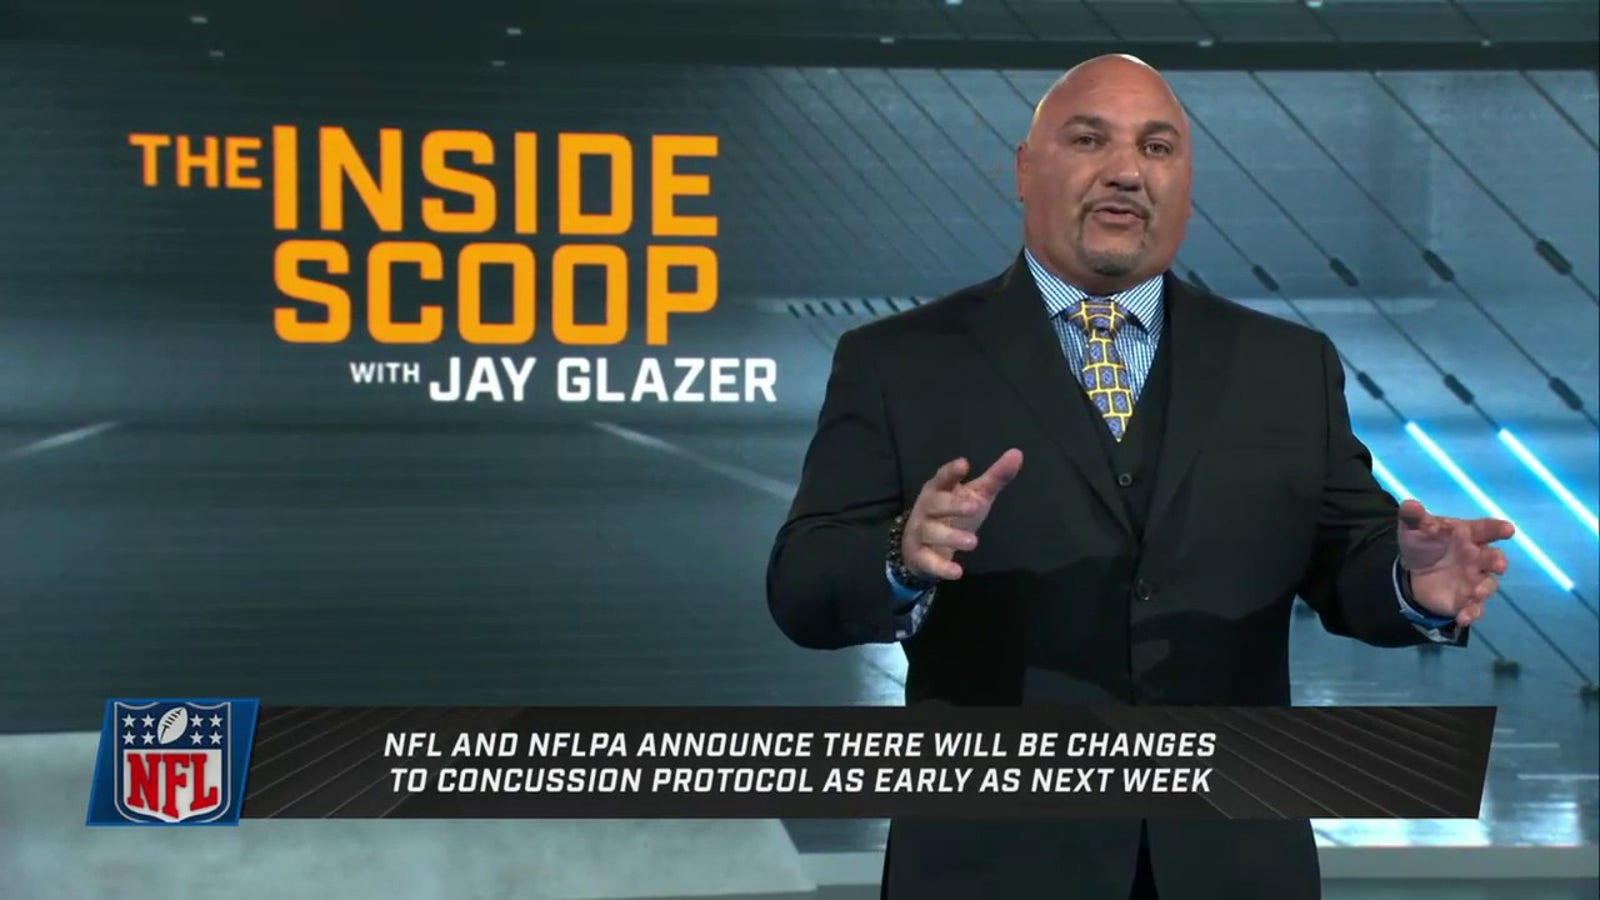 Jay Glazer discusses NFL and NFLPA changes to concussion protocol after Tua Tagovailoa's injuries